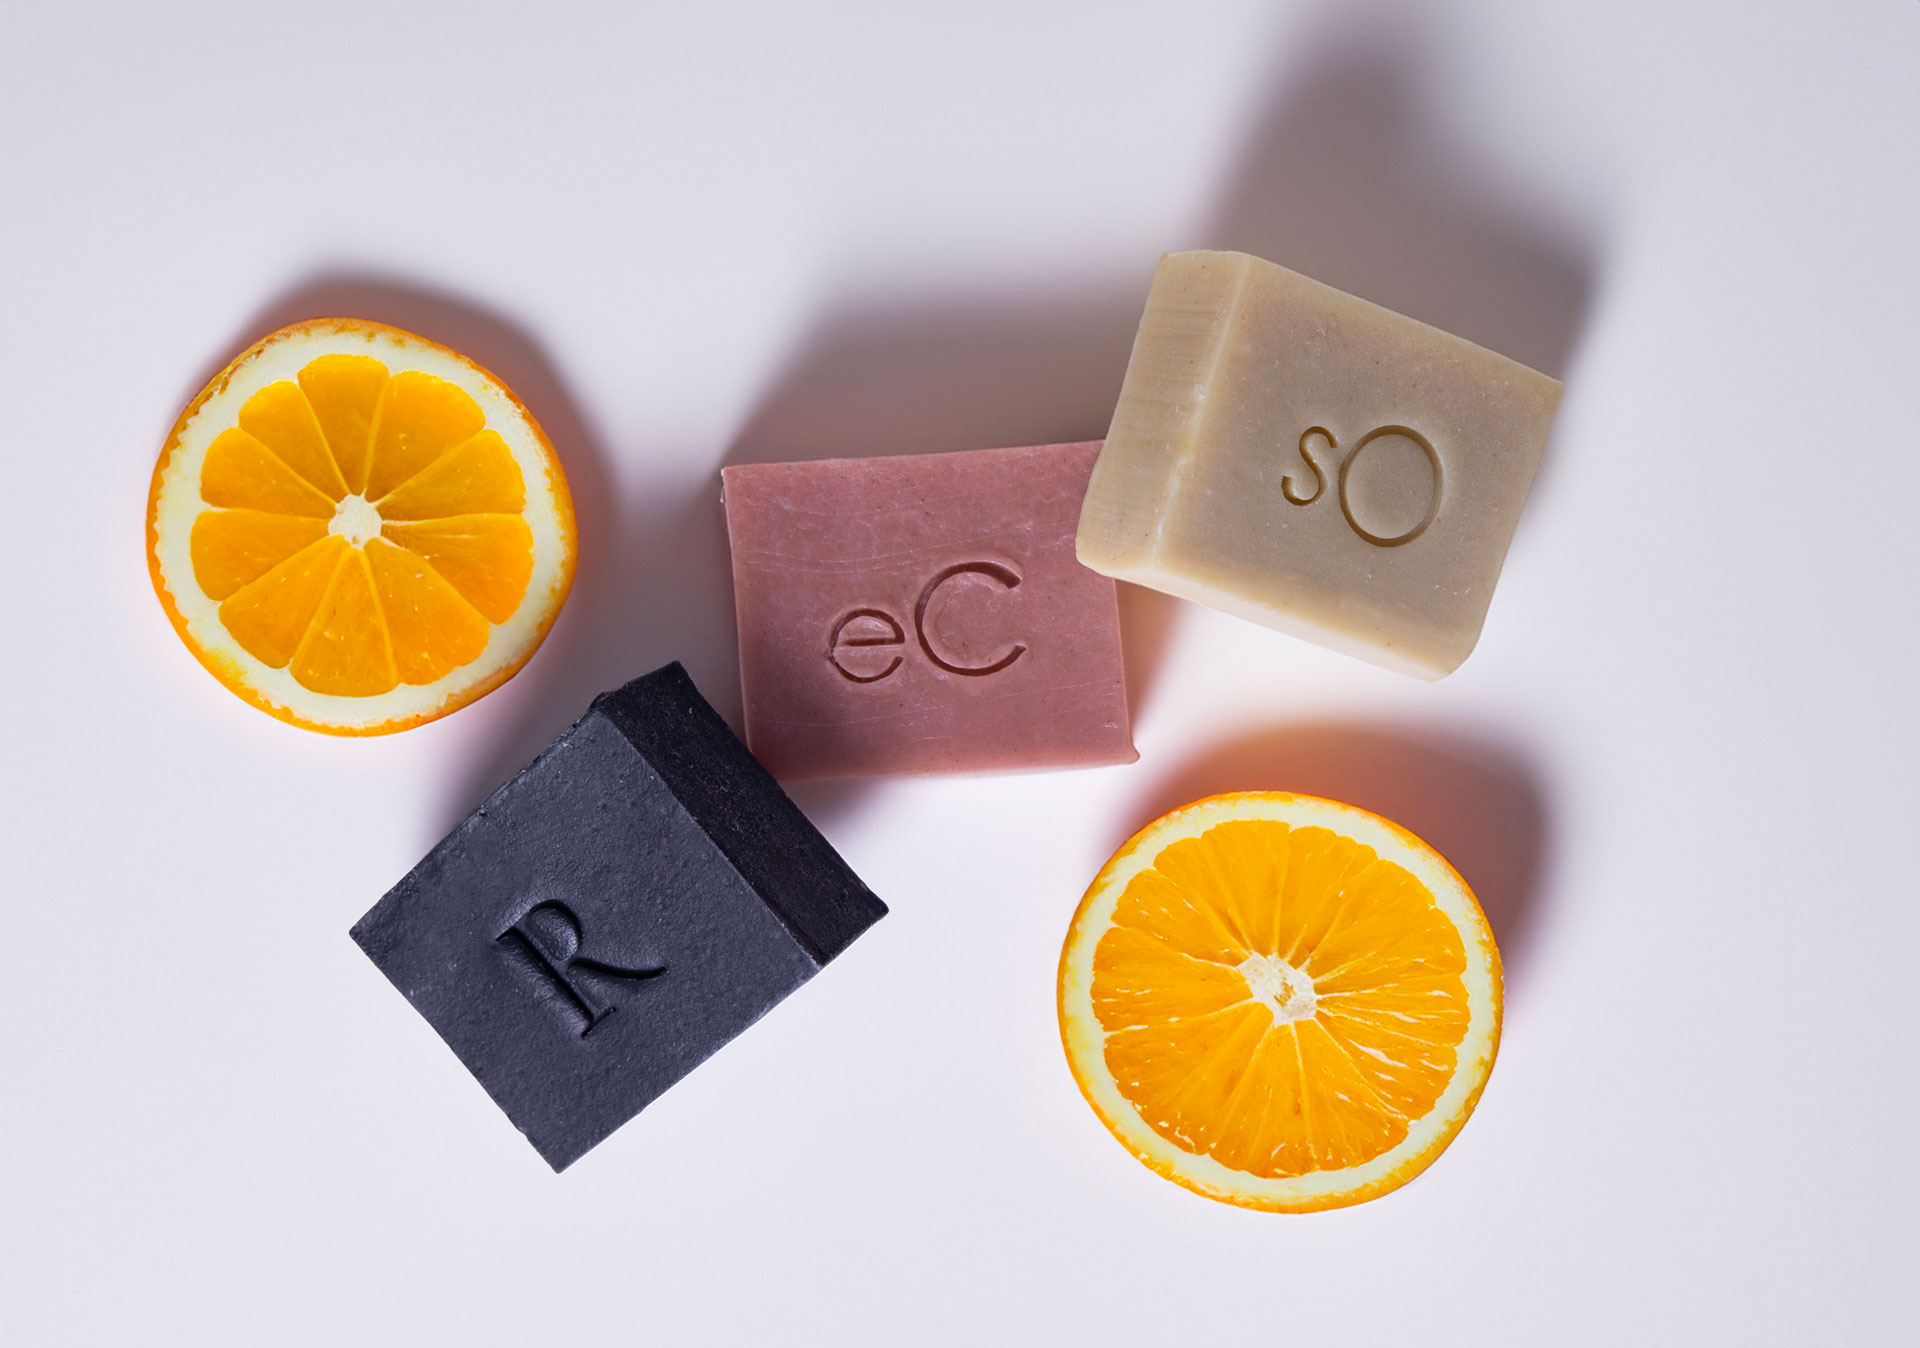 Four colorful bars of soap labeled ec, so, and r arranged with two orange slices on a light background, showcasing a vibrant and clean aesthetic.